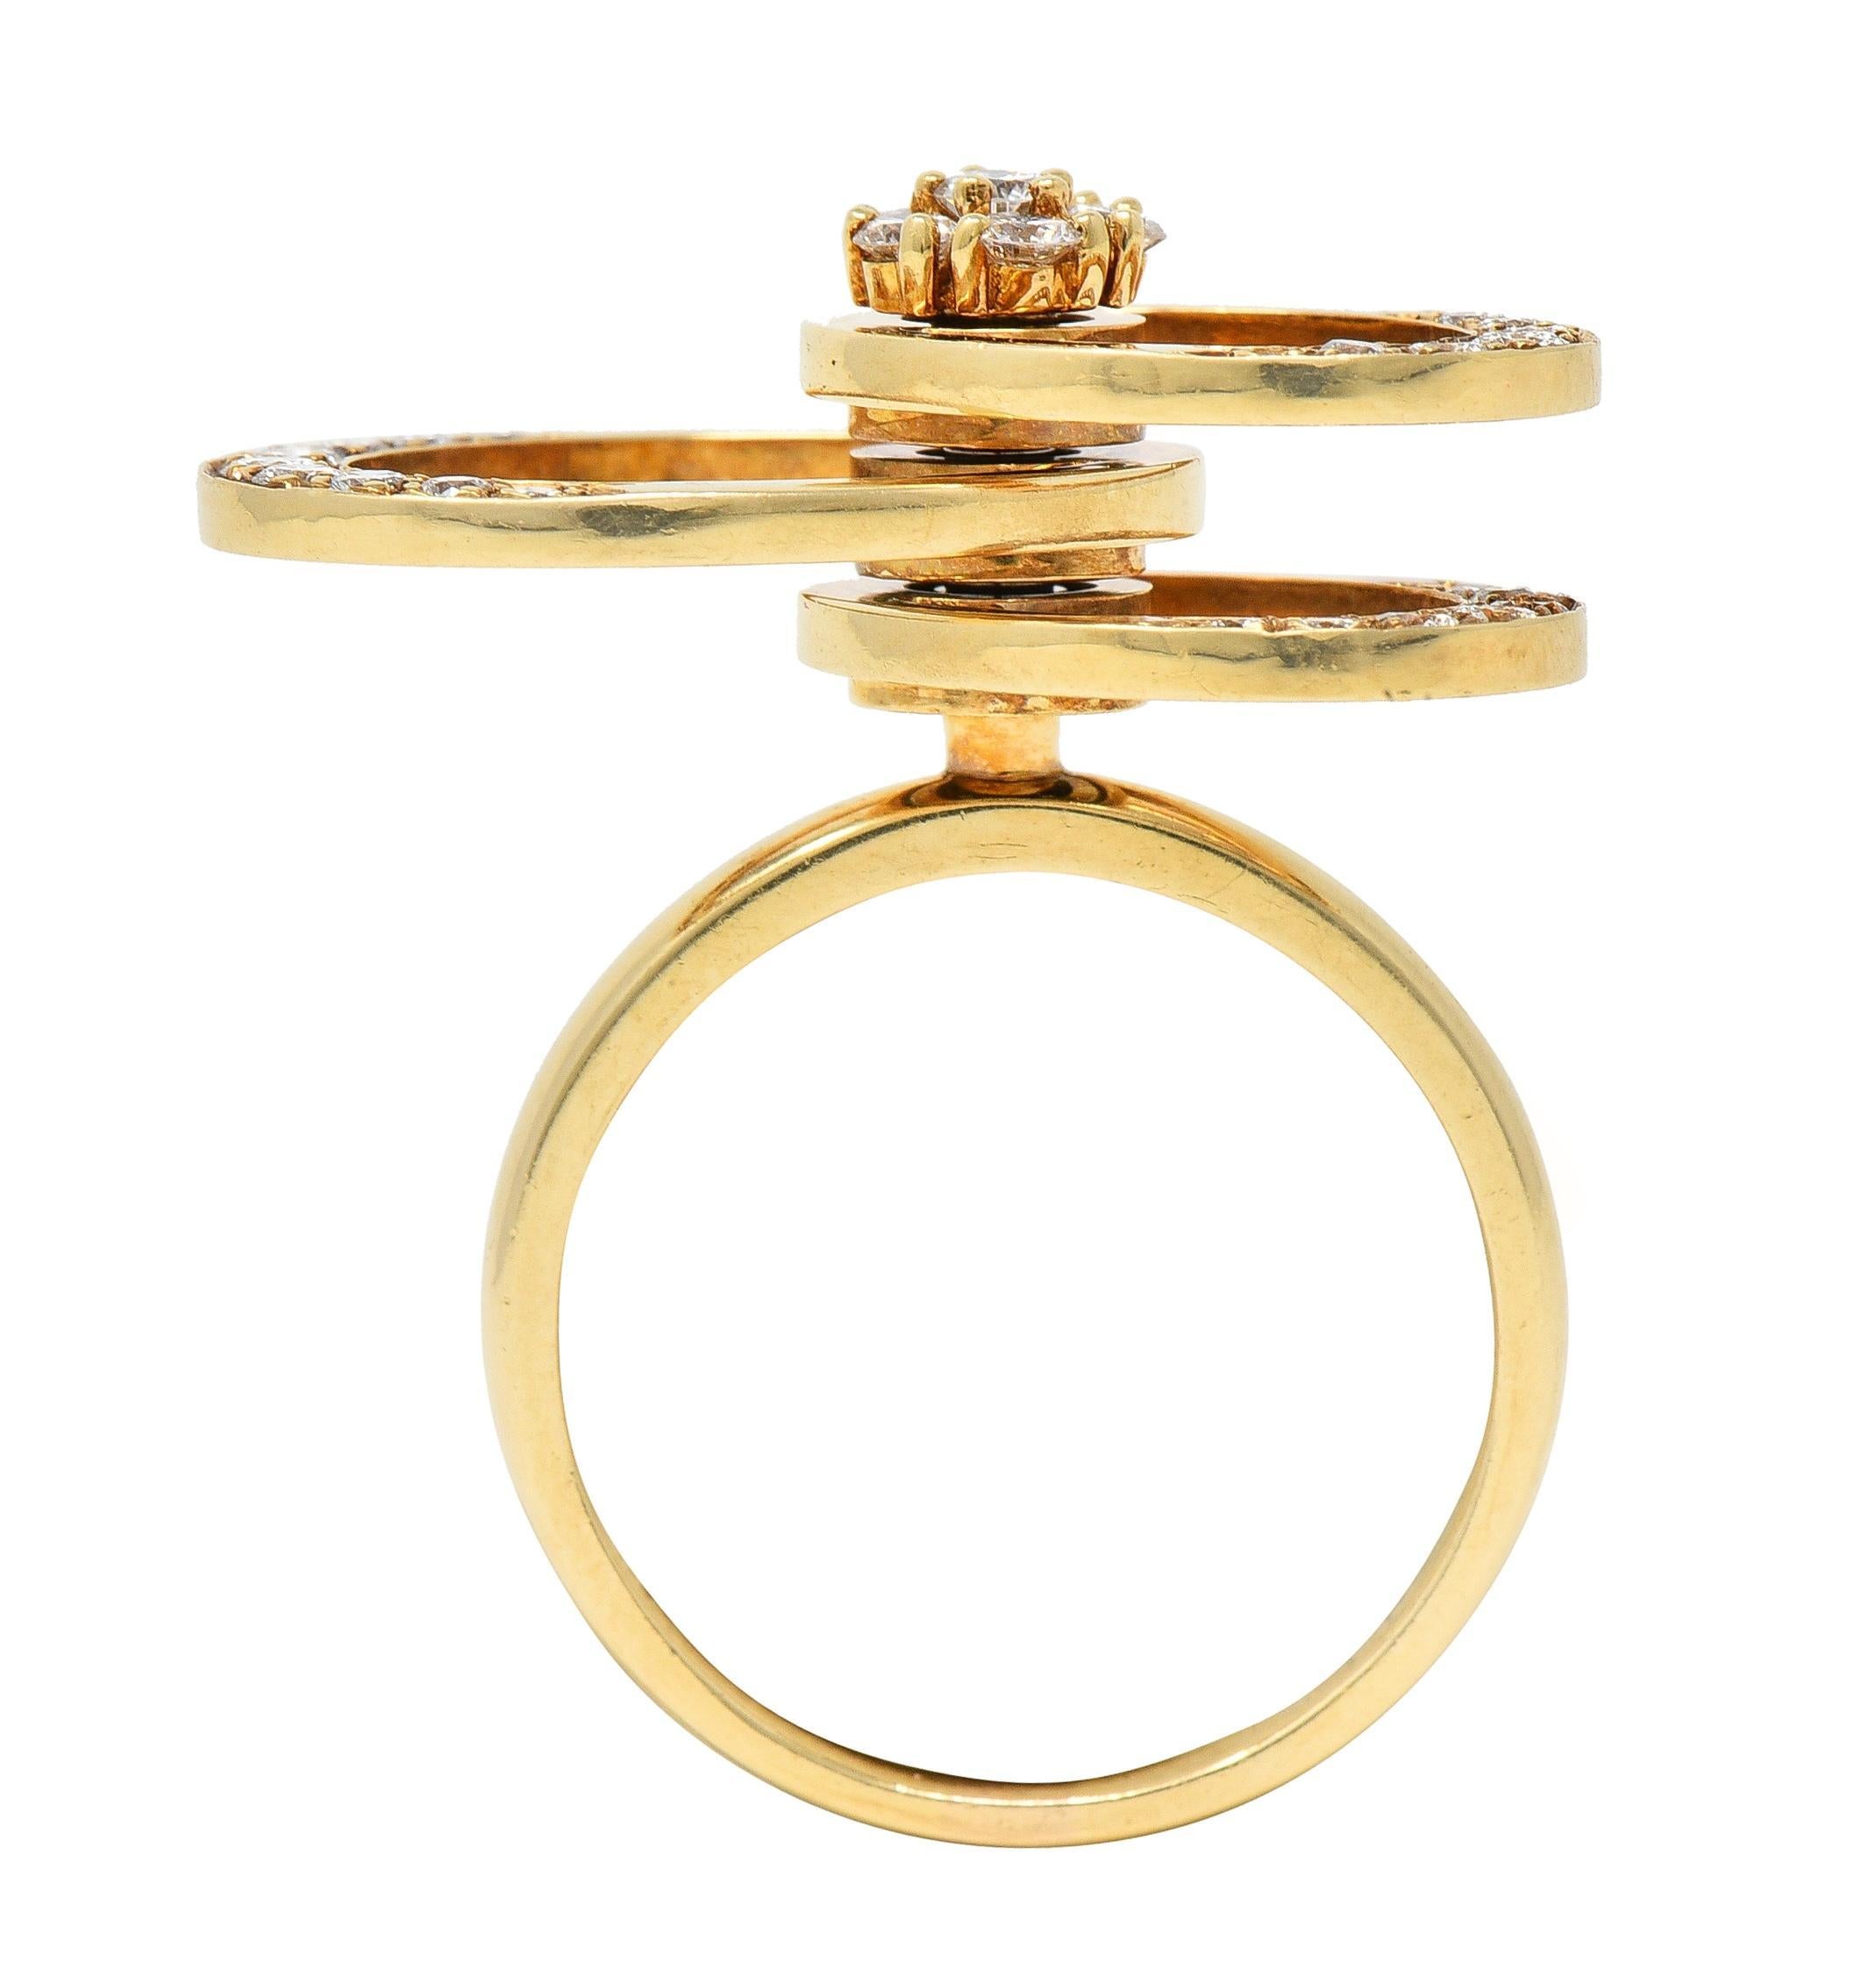 Featuring three oval-shaped rings pierced and stacked on a post - spinning with kinetic movement
Top of post features round brilliant cut diamonds prong set in a floral motif cluster
With additional diamond bead set on edges of ovals 
Weighing